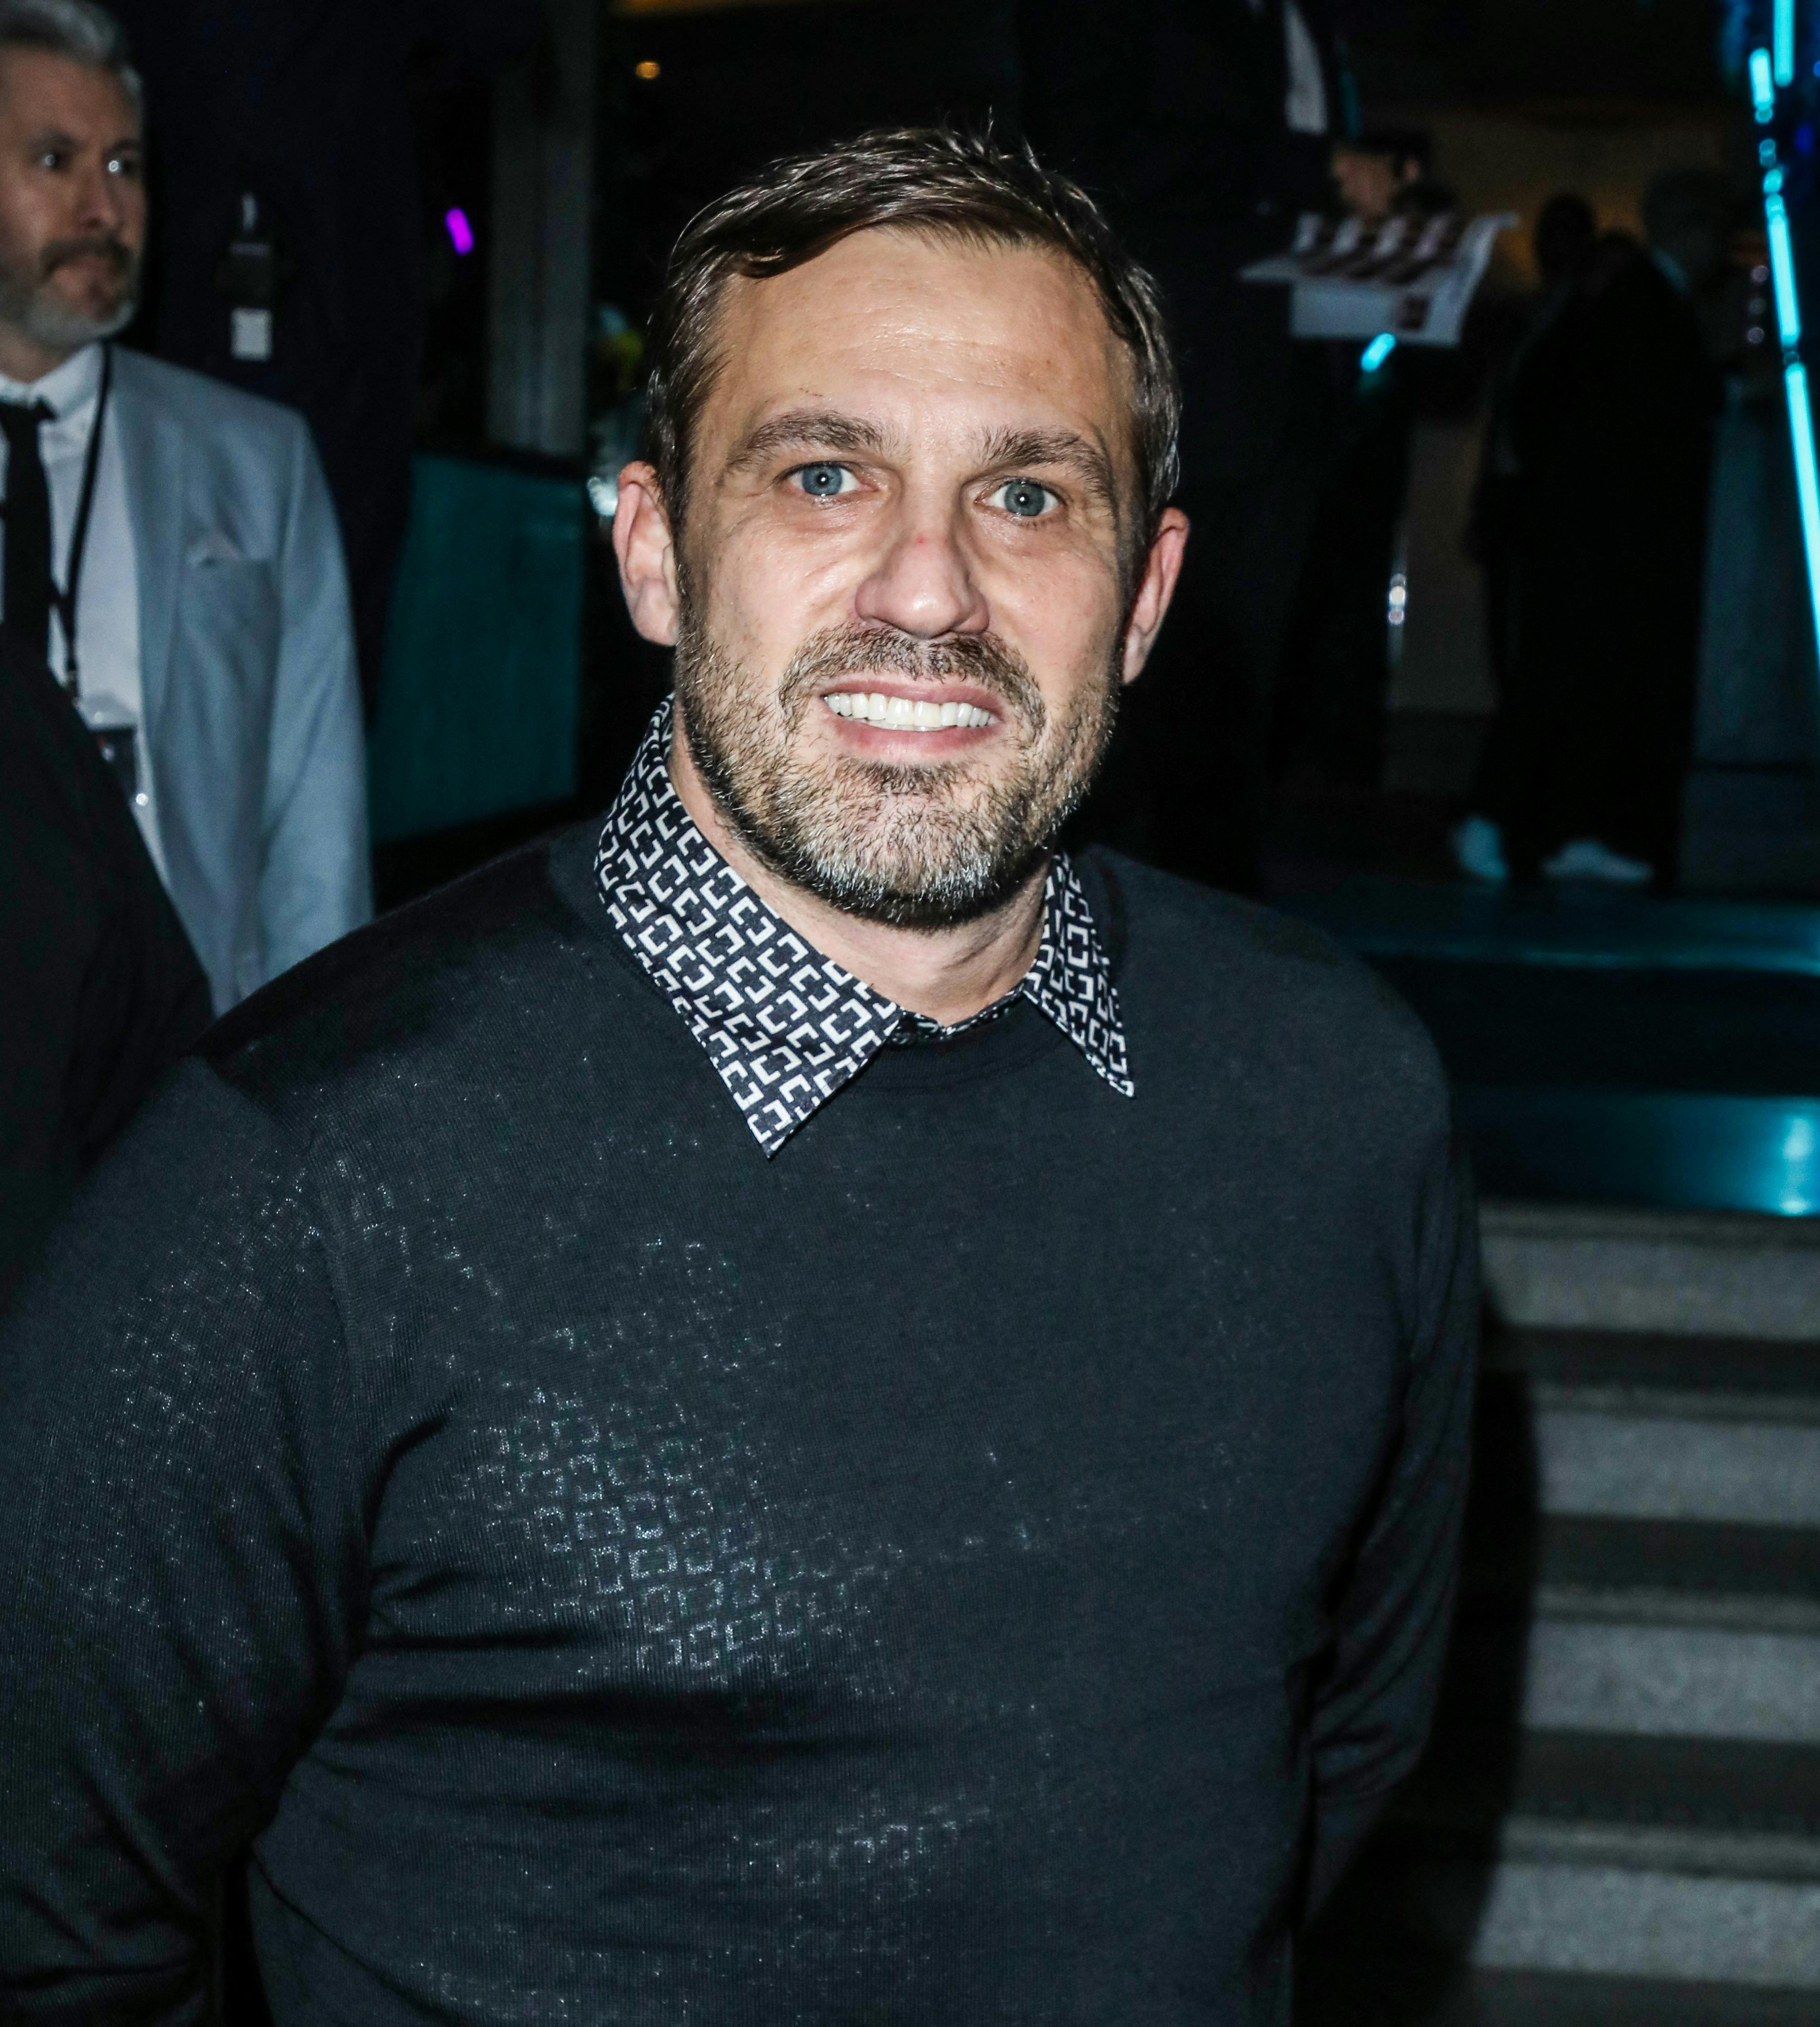 Celebrities seen arriving for the Inside Soap Awards 2022 at 100 Wardour Street in London. 17 Oct 2022 Pictured: Jamie Lomas. Photo credit: MEGA TheMegaAgency.com +1 888 505 6342 (Mega Agency TagID: MEGA908909_002.jpg) [Photo via Mega Agency]